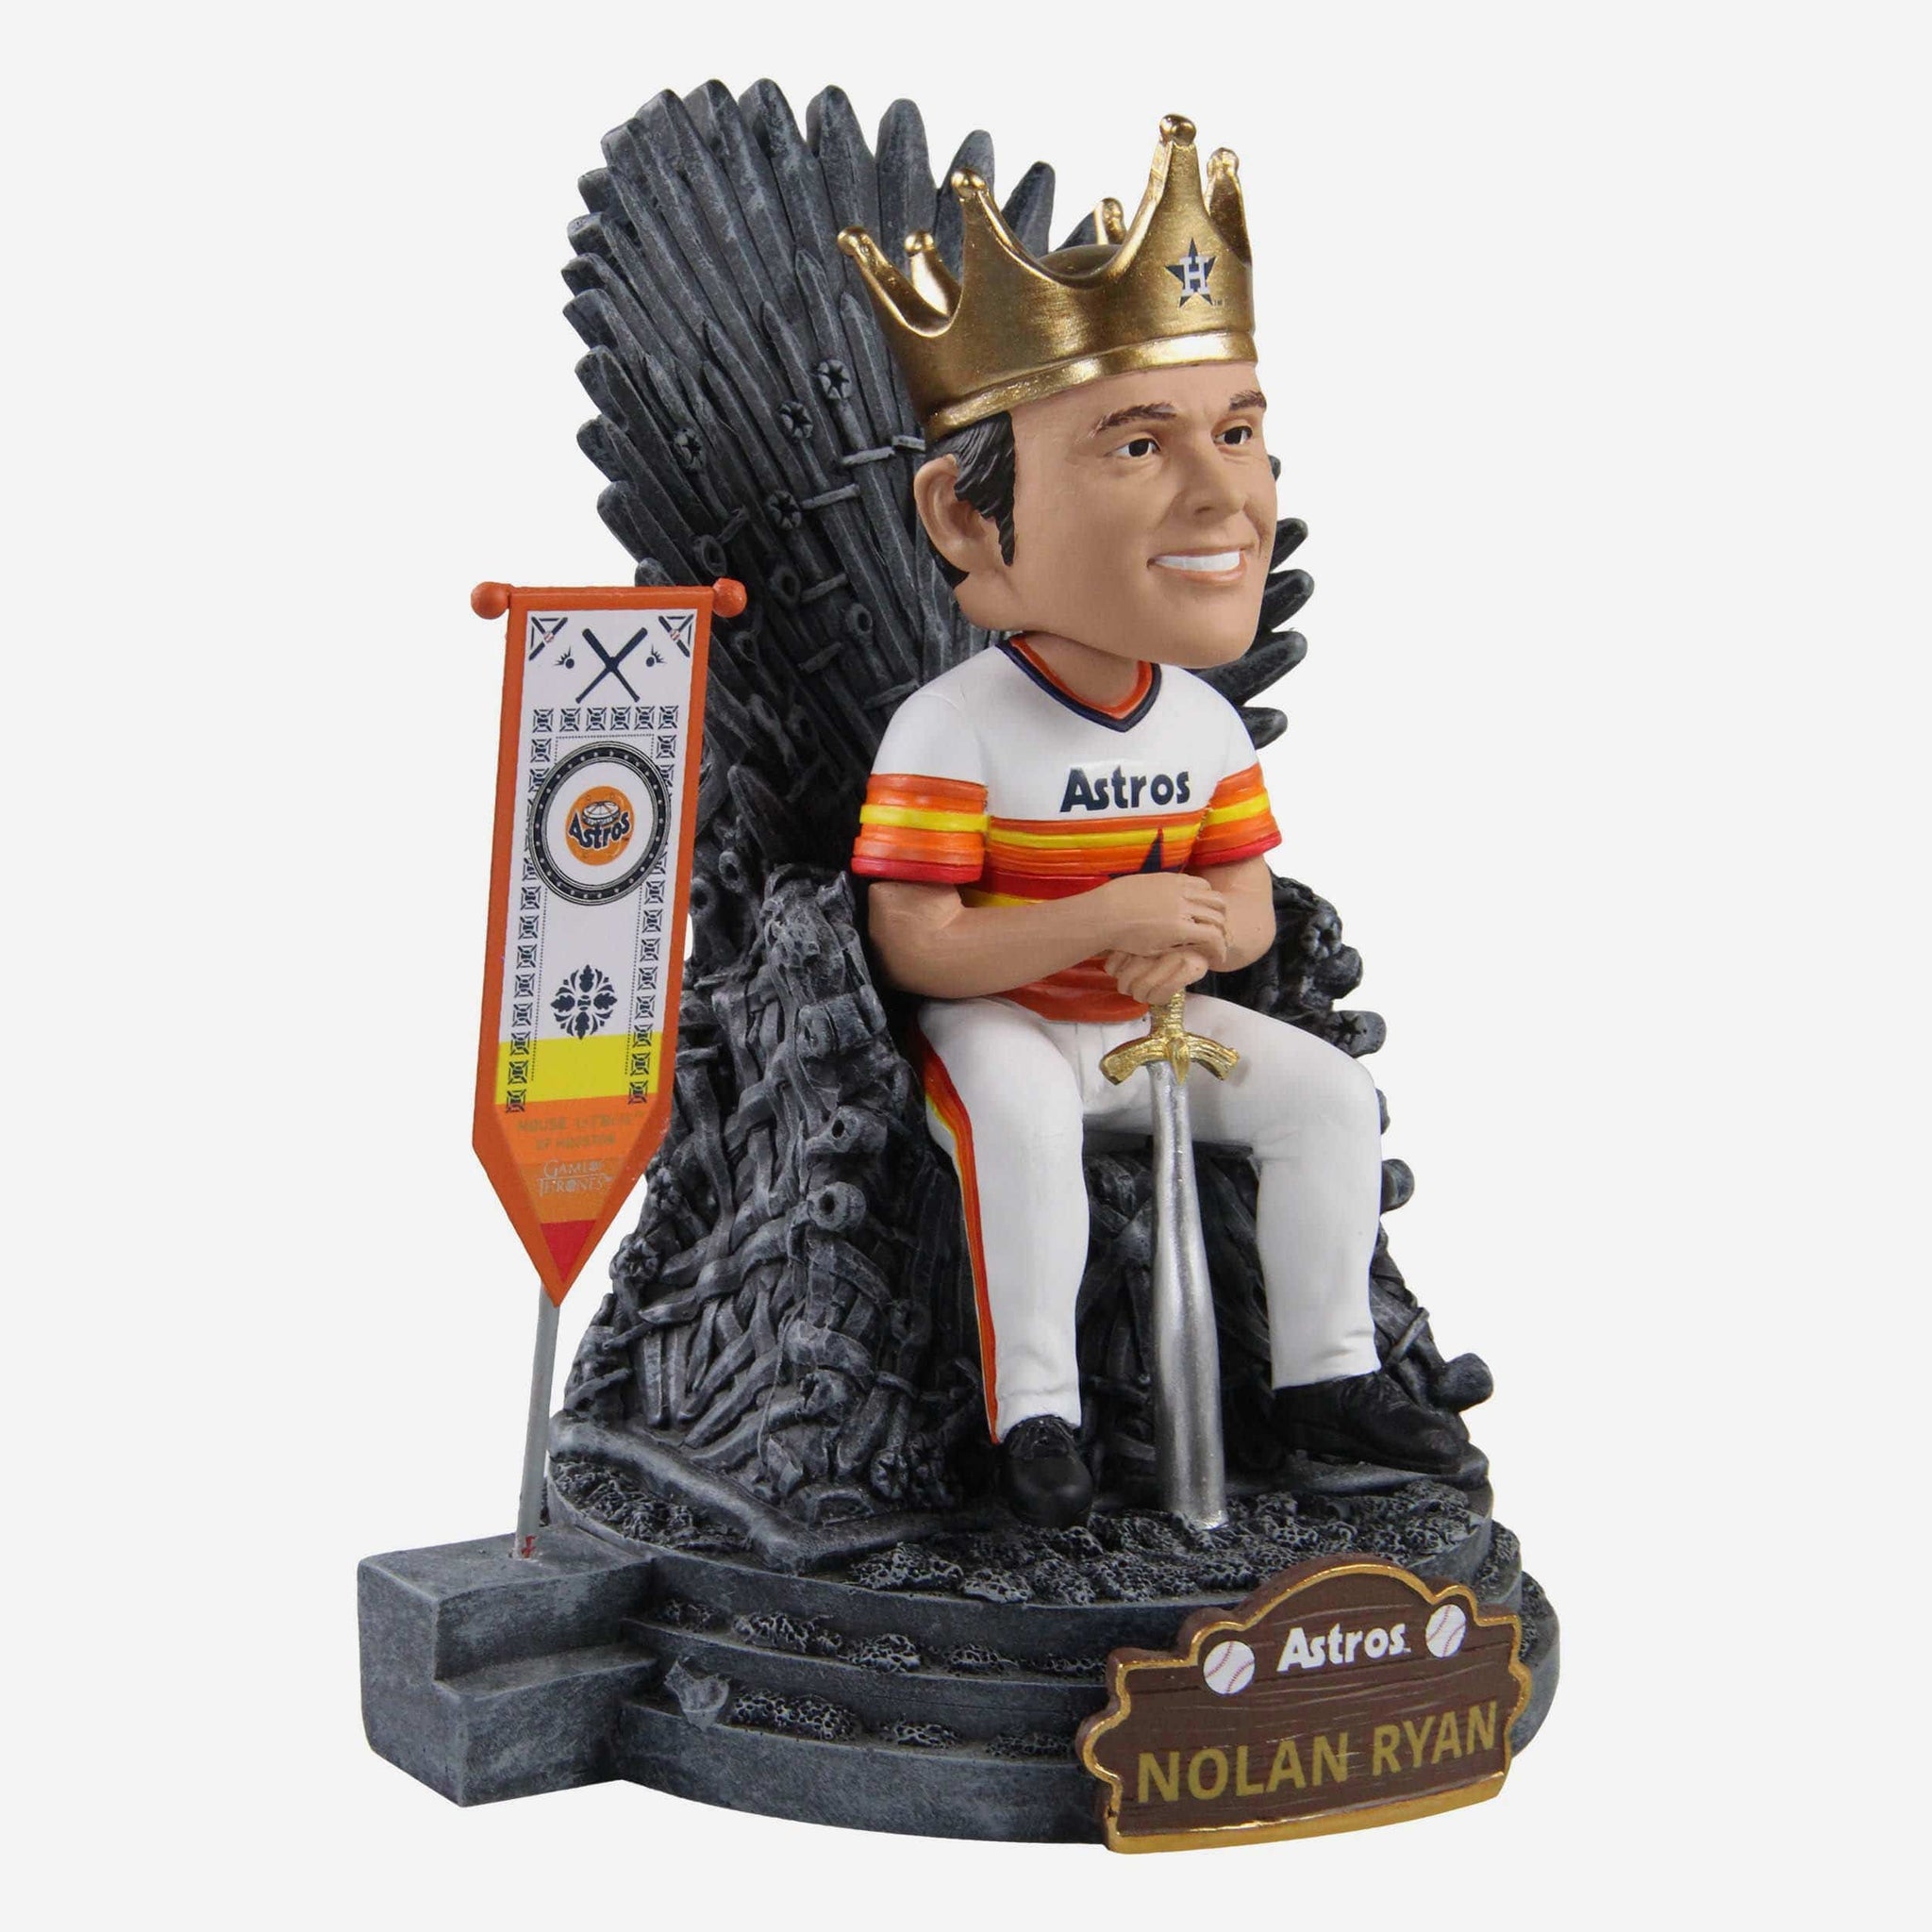 Houston Astros on X: Come take a picture on the throne at